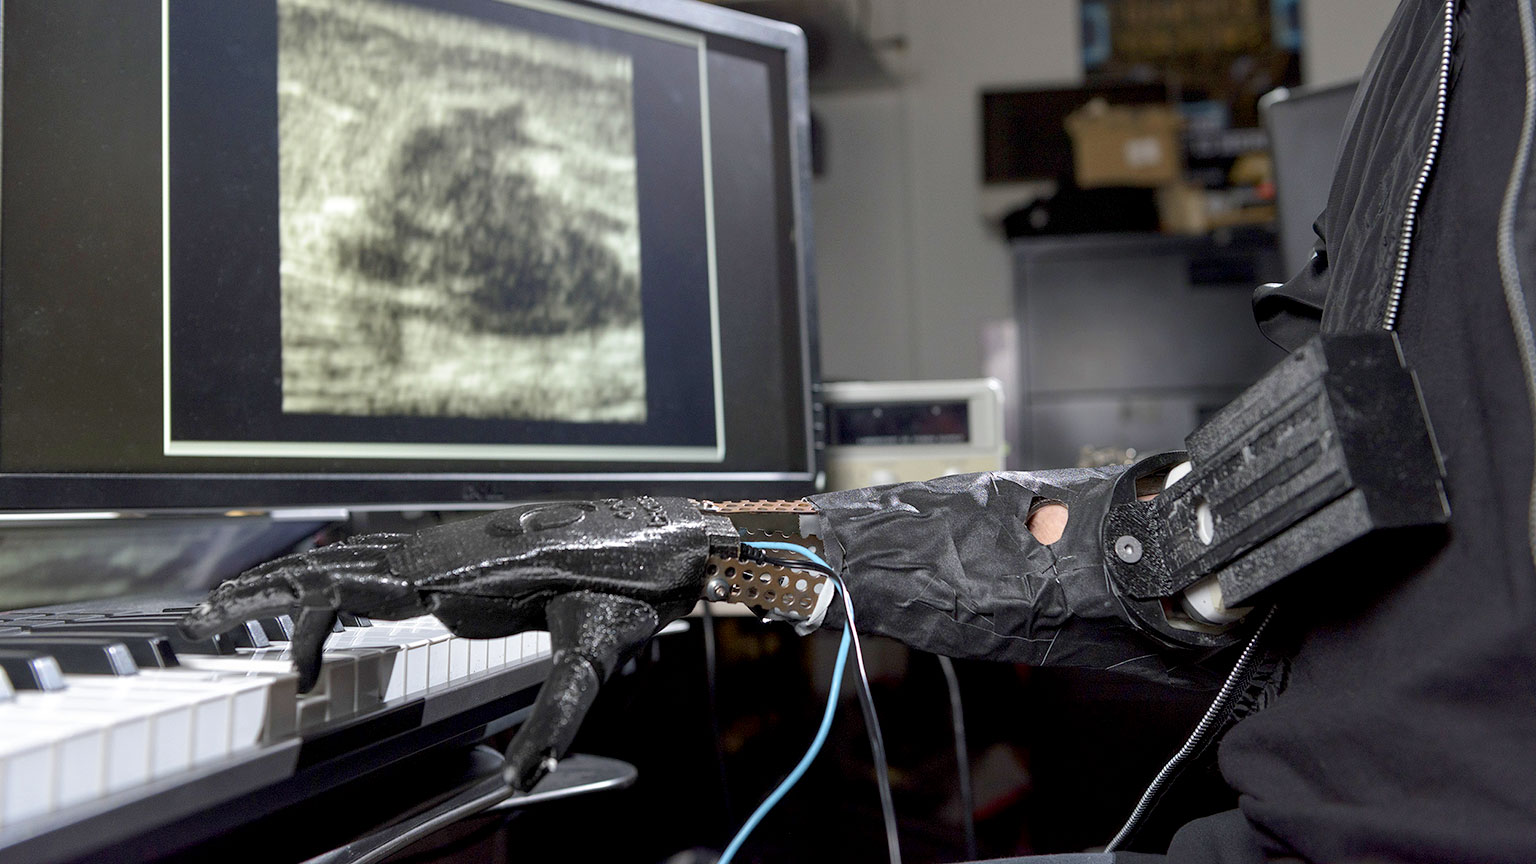 A robotic prosthetic hand called the "Skywalker Hand" invented by the Center for Music Technology, plays a keyboard.